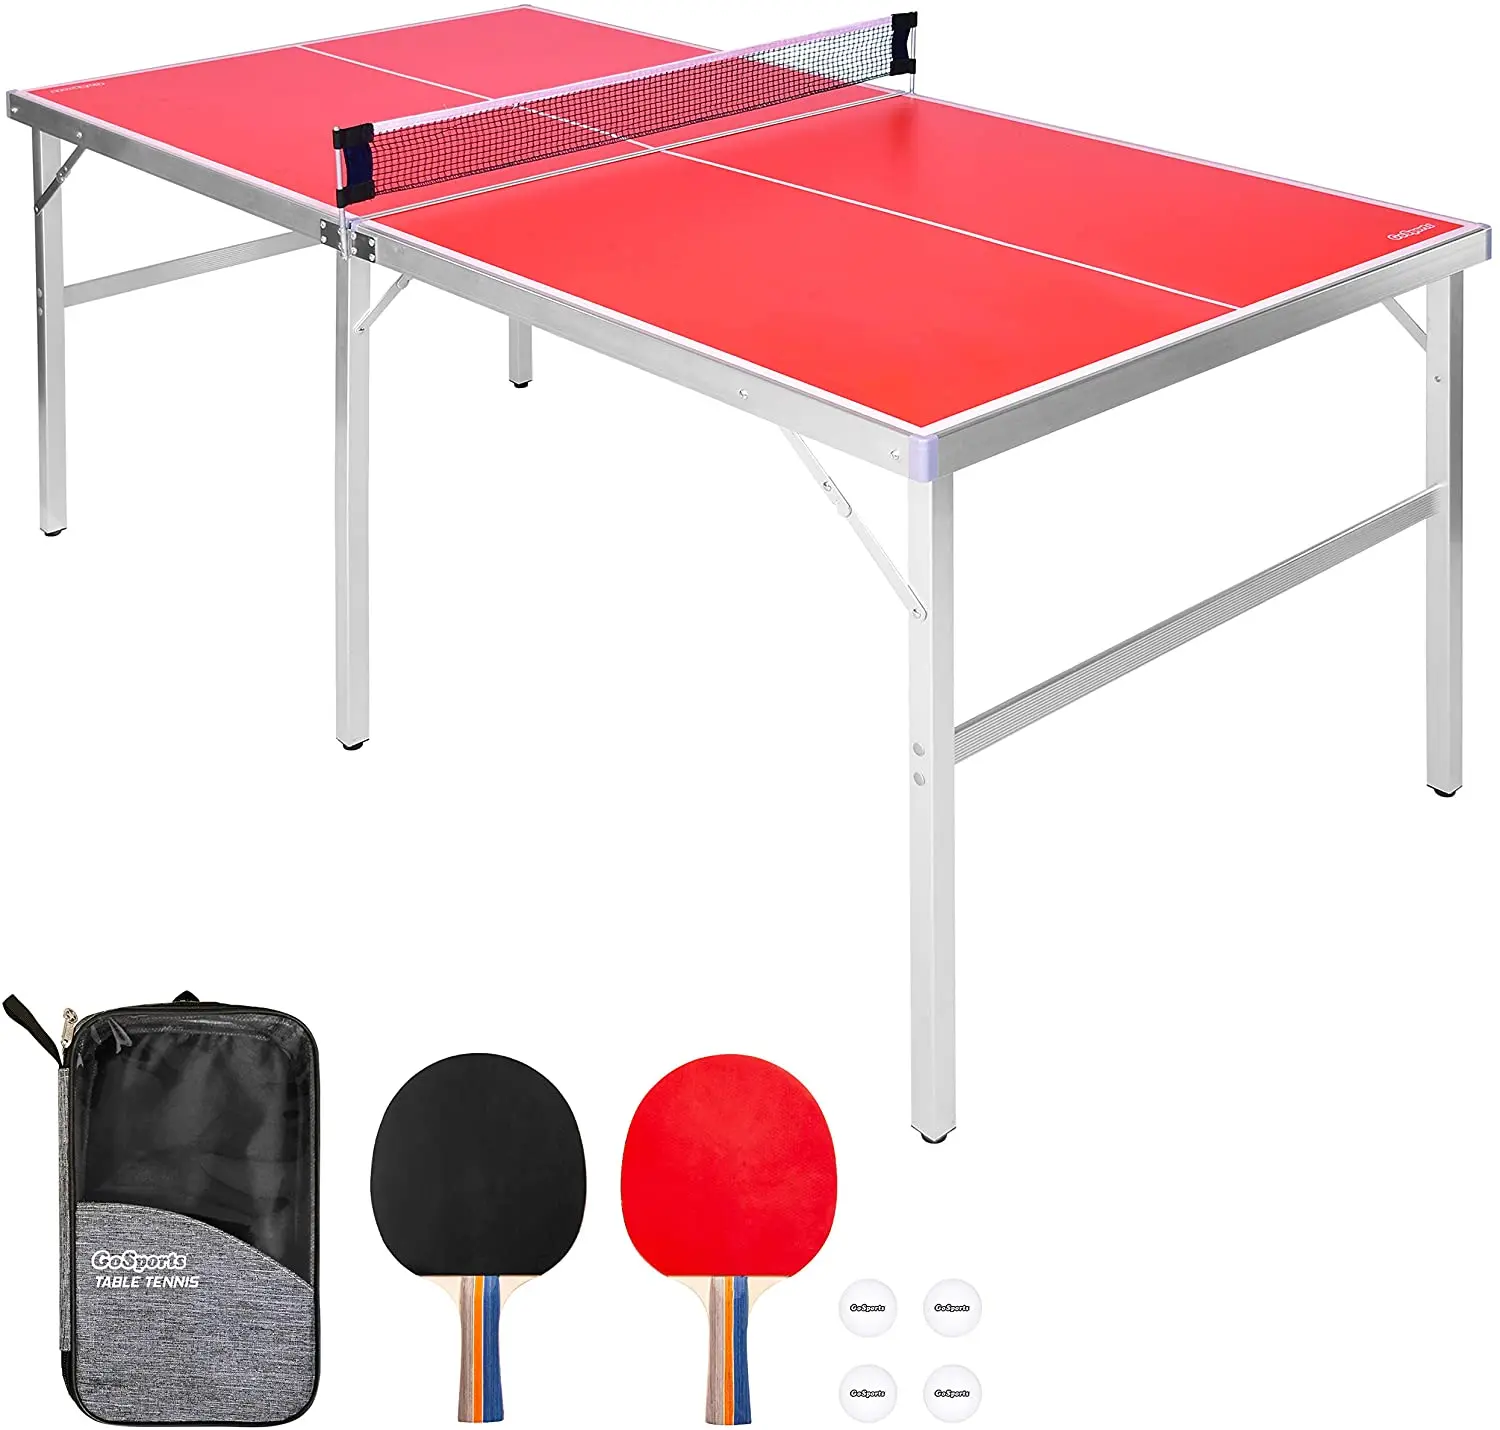 Wholesale Waterproof Folding Outdoor Table Tennis Table Standard Size Aluminum OEM From m.alibaba